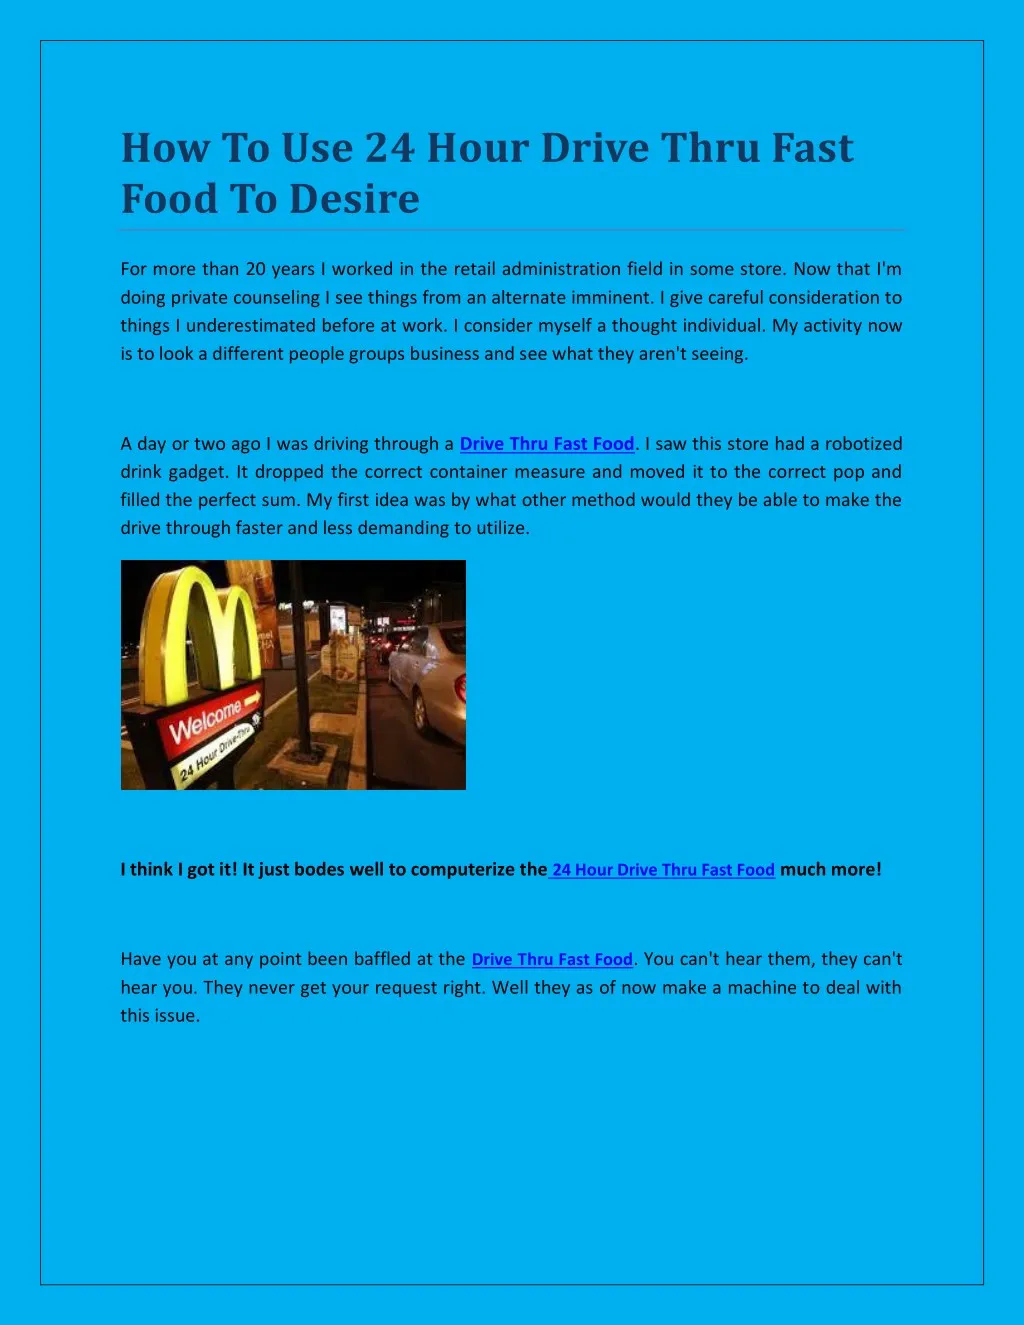 how to use 24 hour drive thru fast food to desire